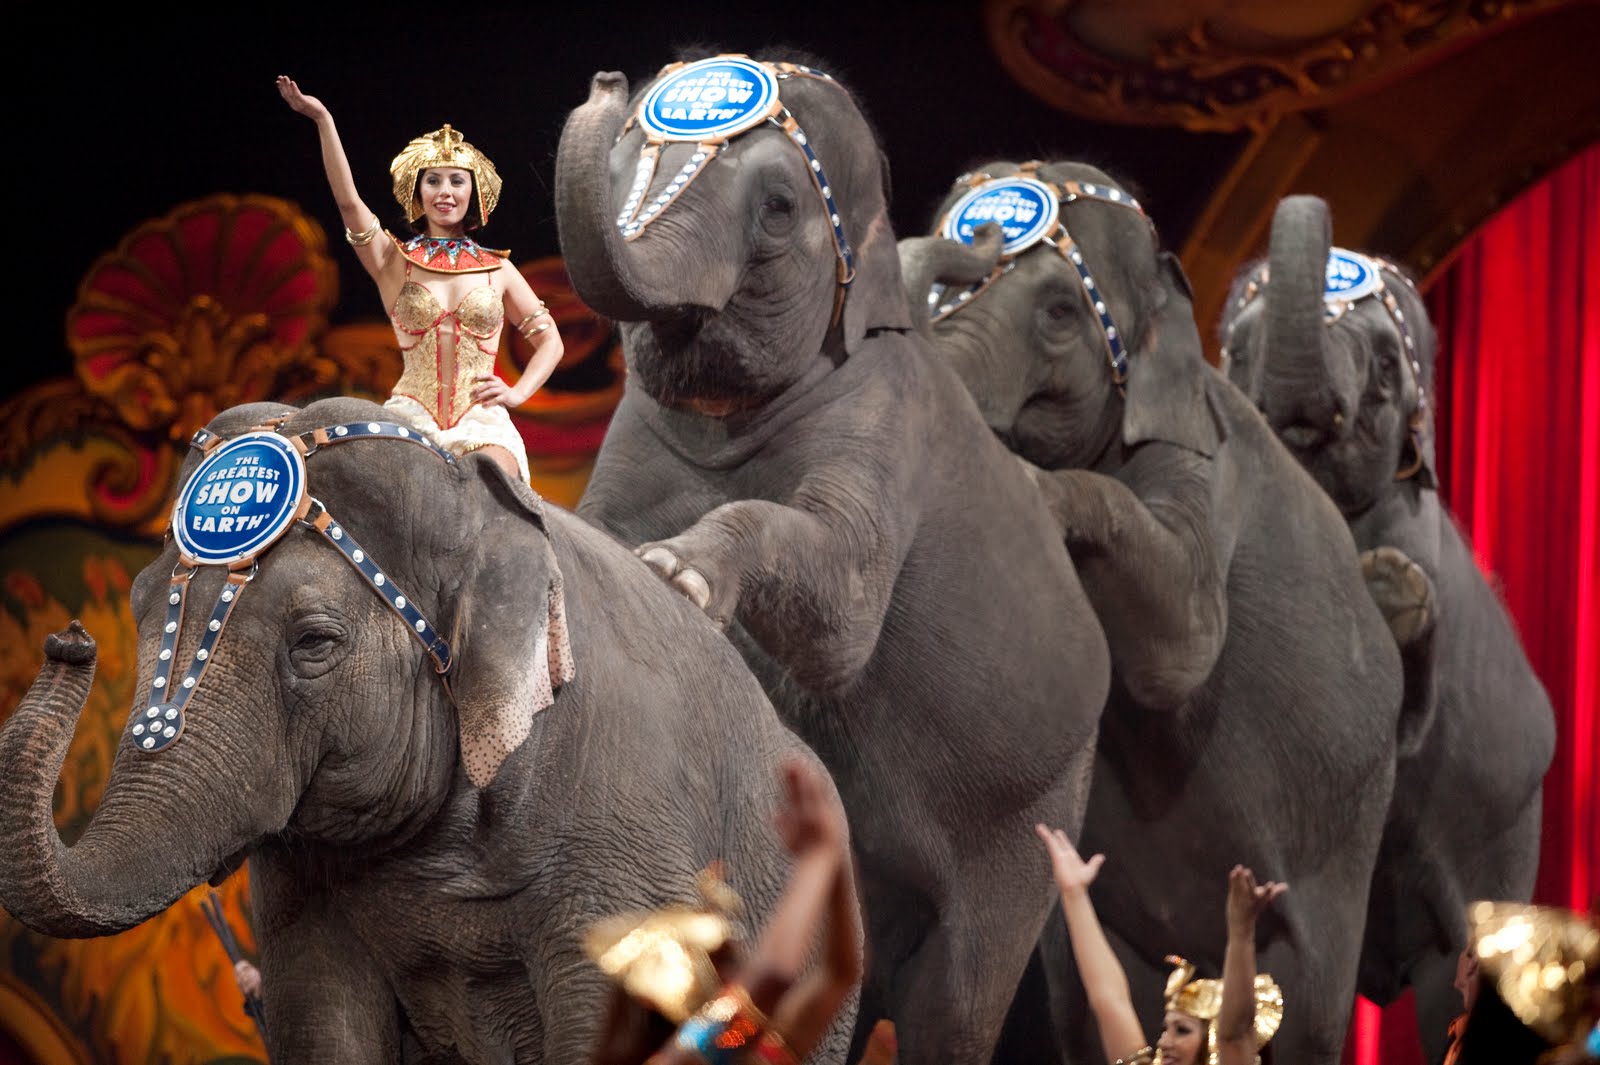 ringling-bros-circus-stop-elephant-acts-by-2018